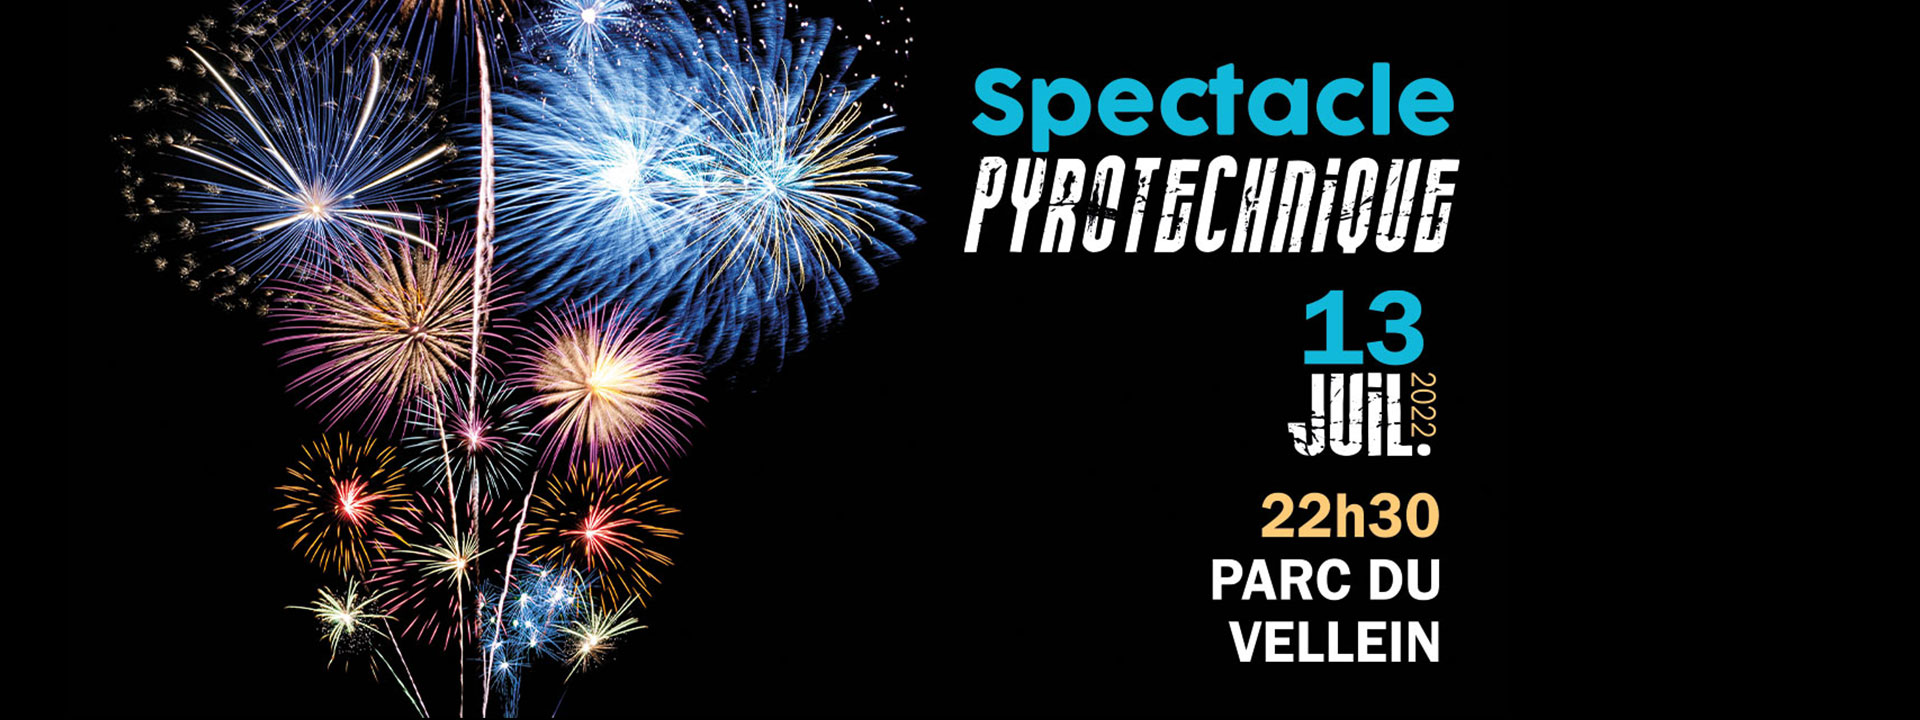 2022-07-05-Spectacle-pyro